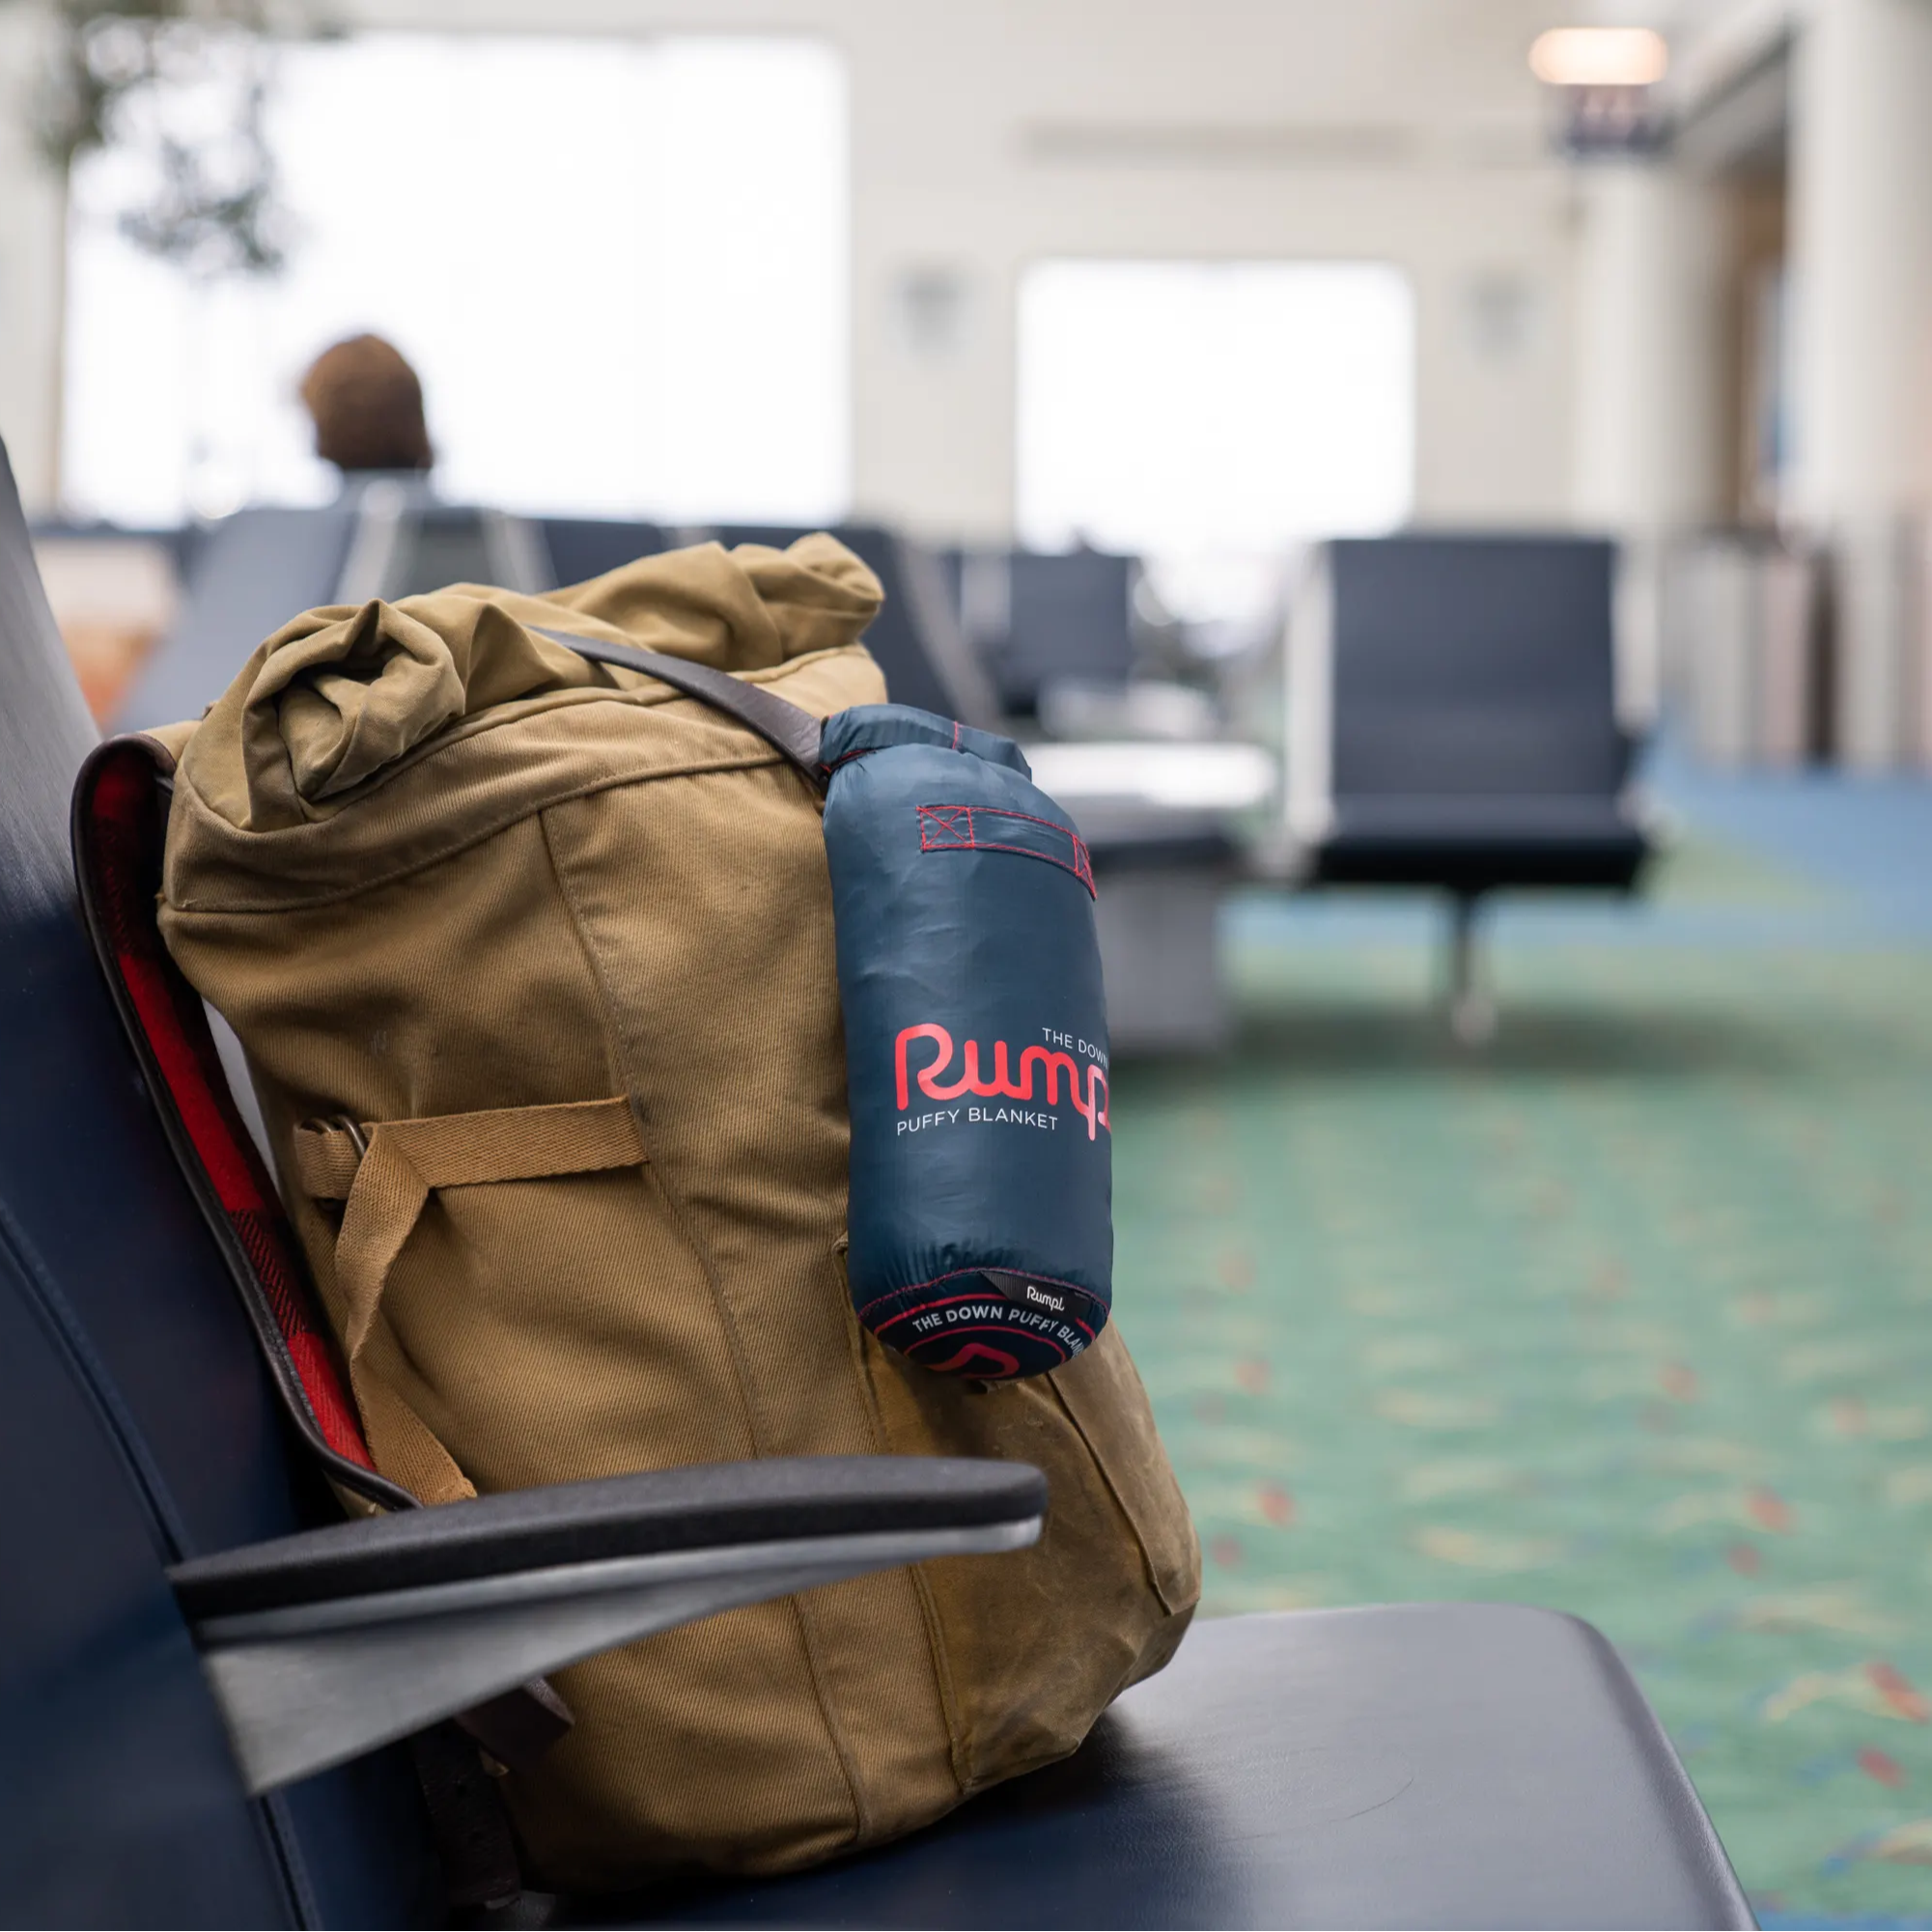 Carry on backpack in the airport with a blanket attached